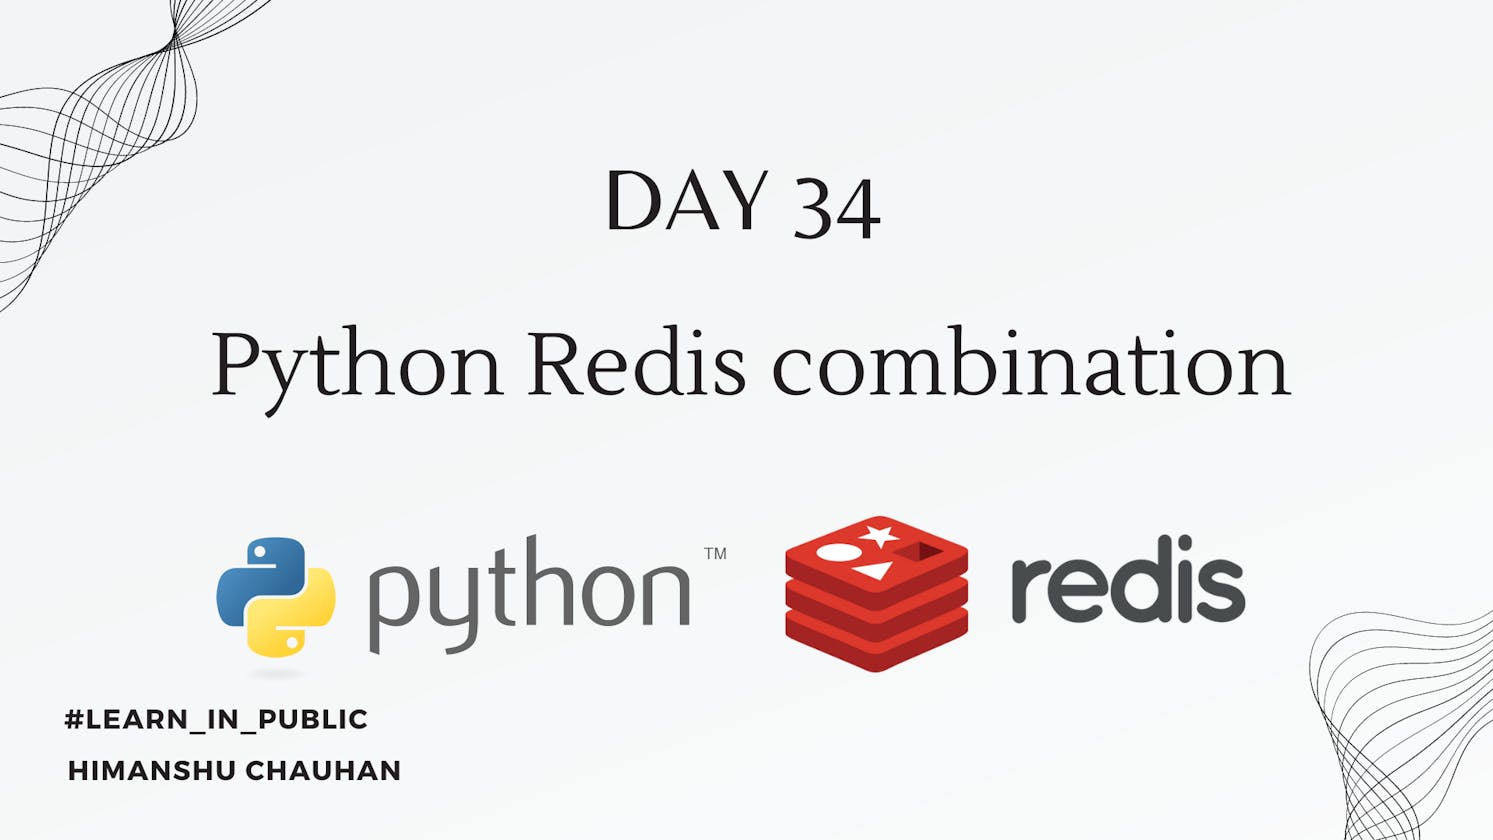 Day 34: Python and Redis combination